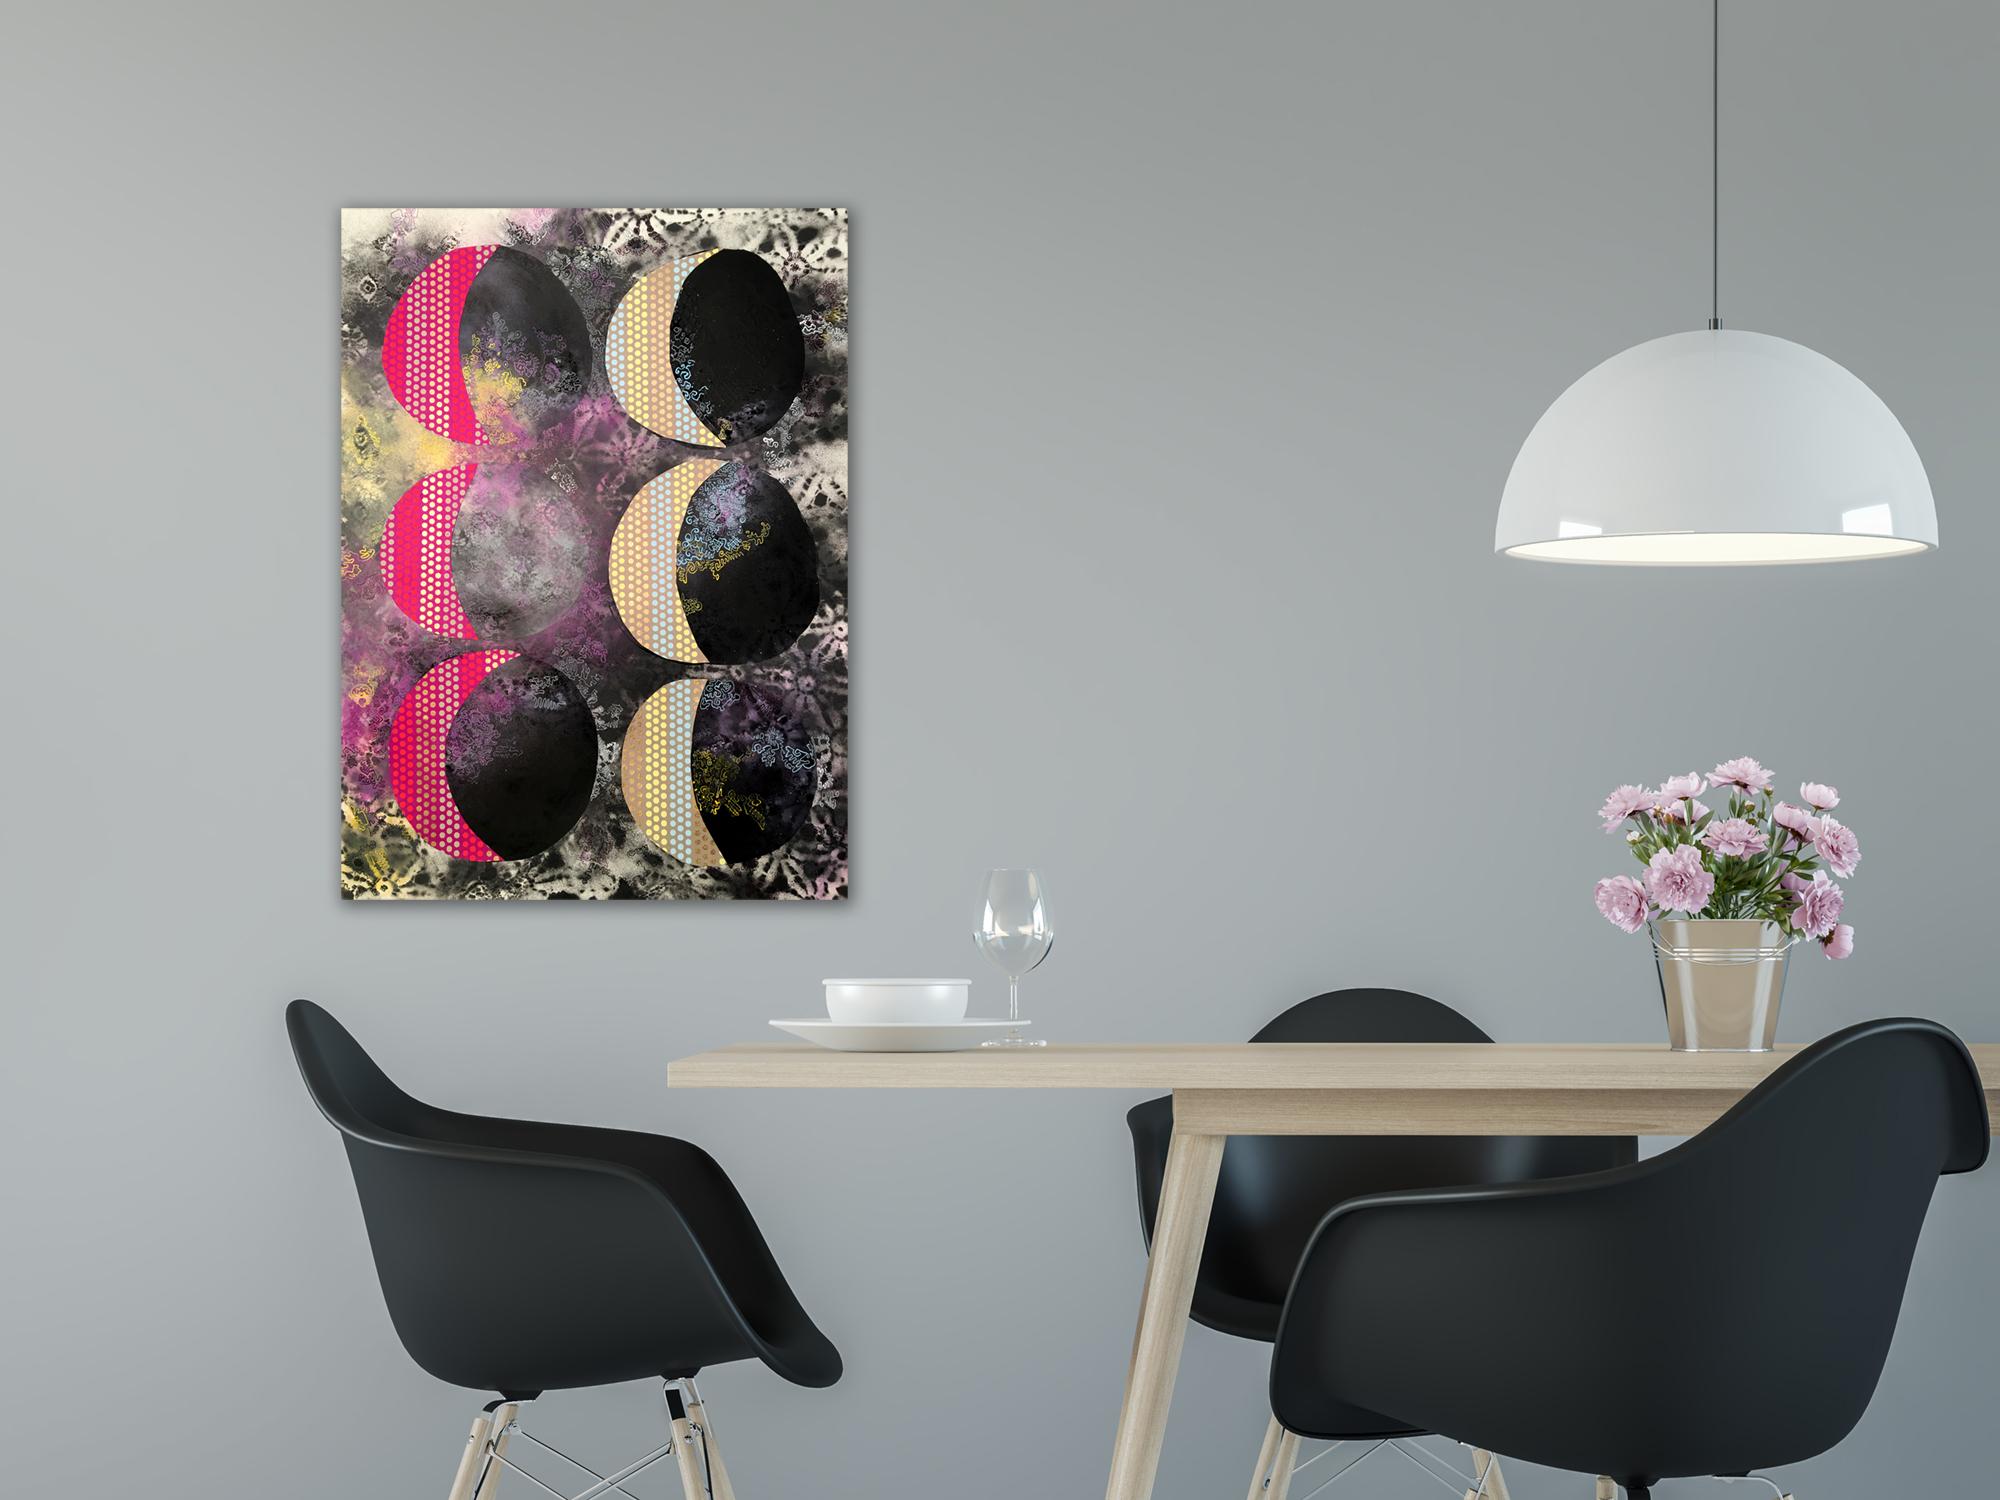 “Six Sigma”, eclipsing moons of pink and yellow float on a patterned black sky - Contemporary Mixed Media Art by Rebecca Darlington